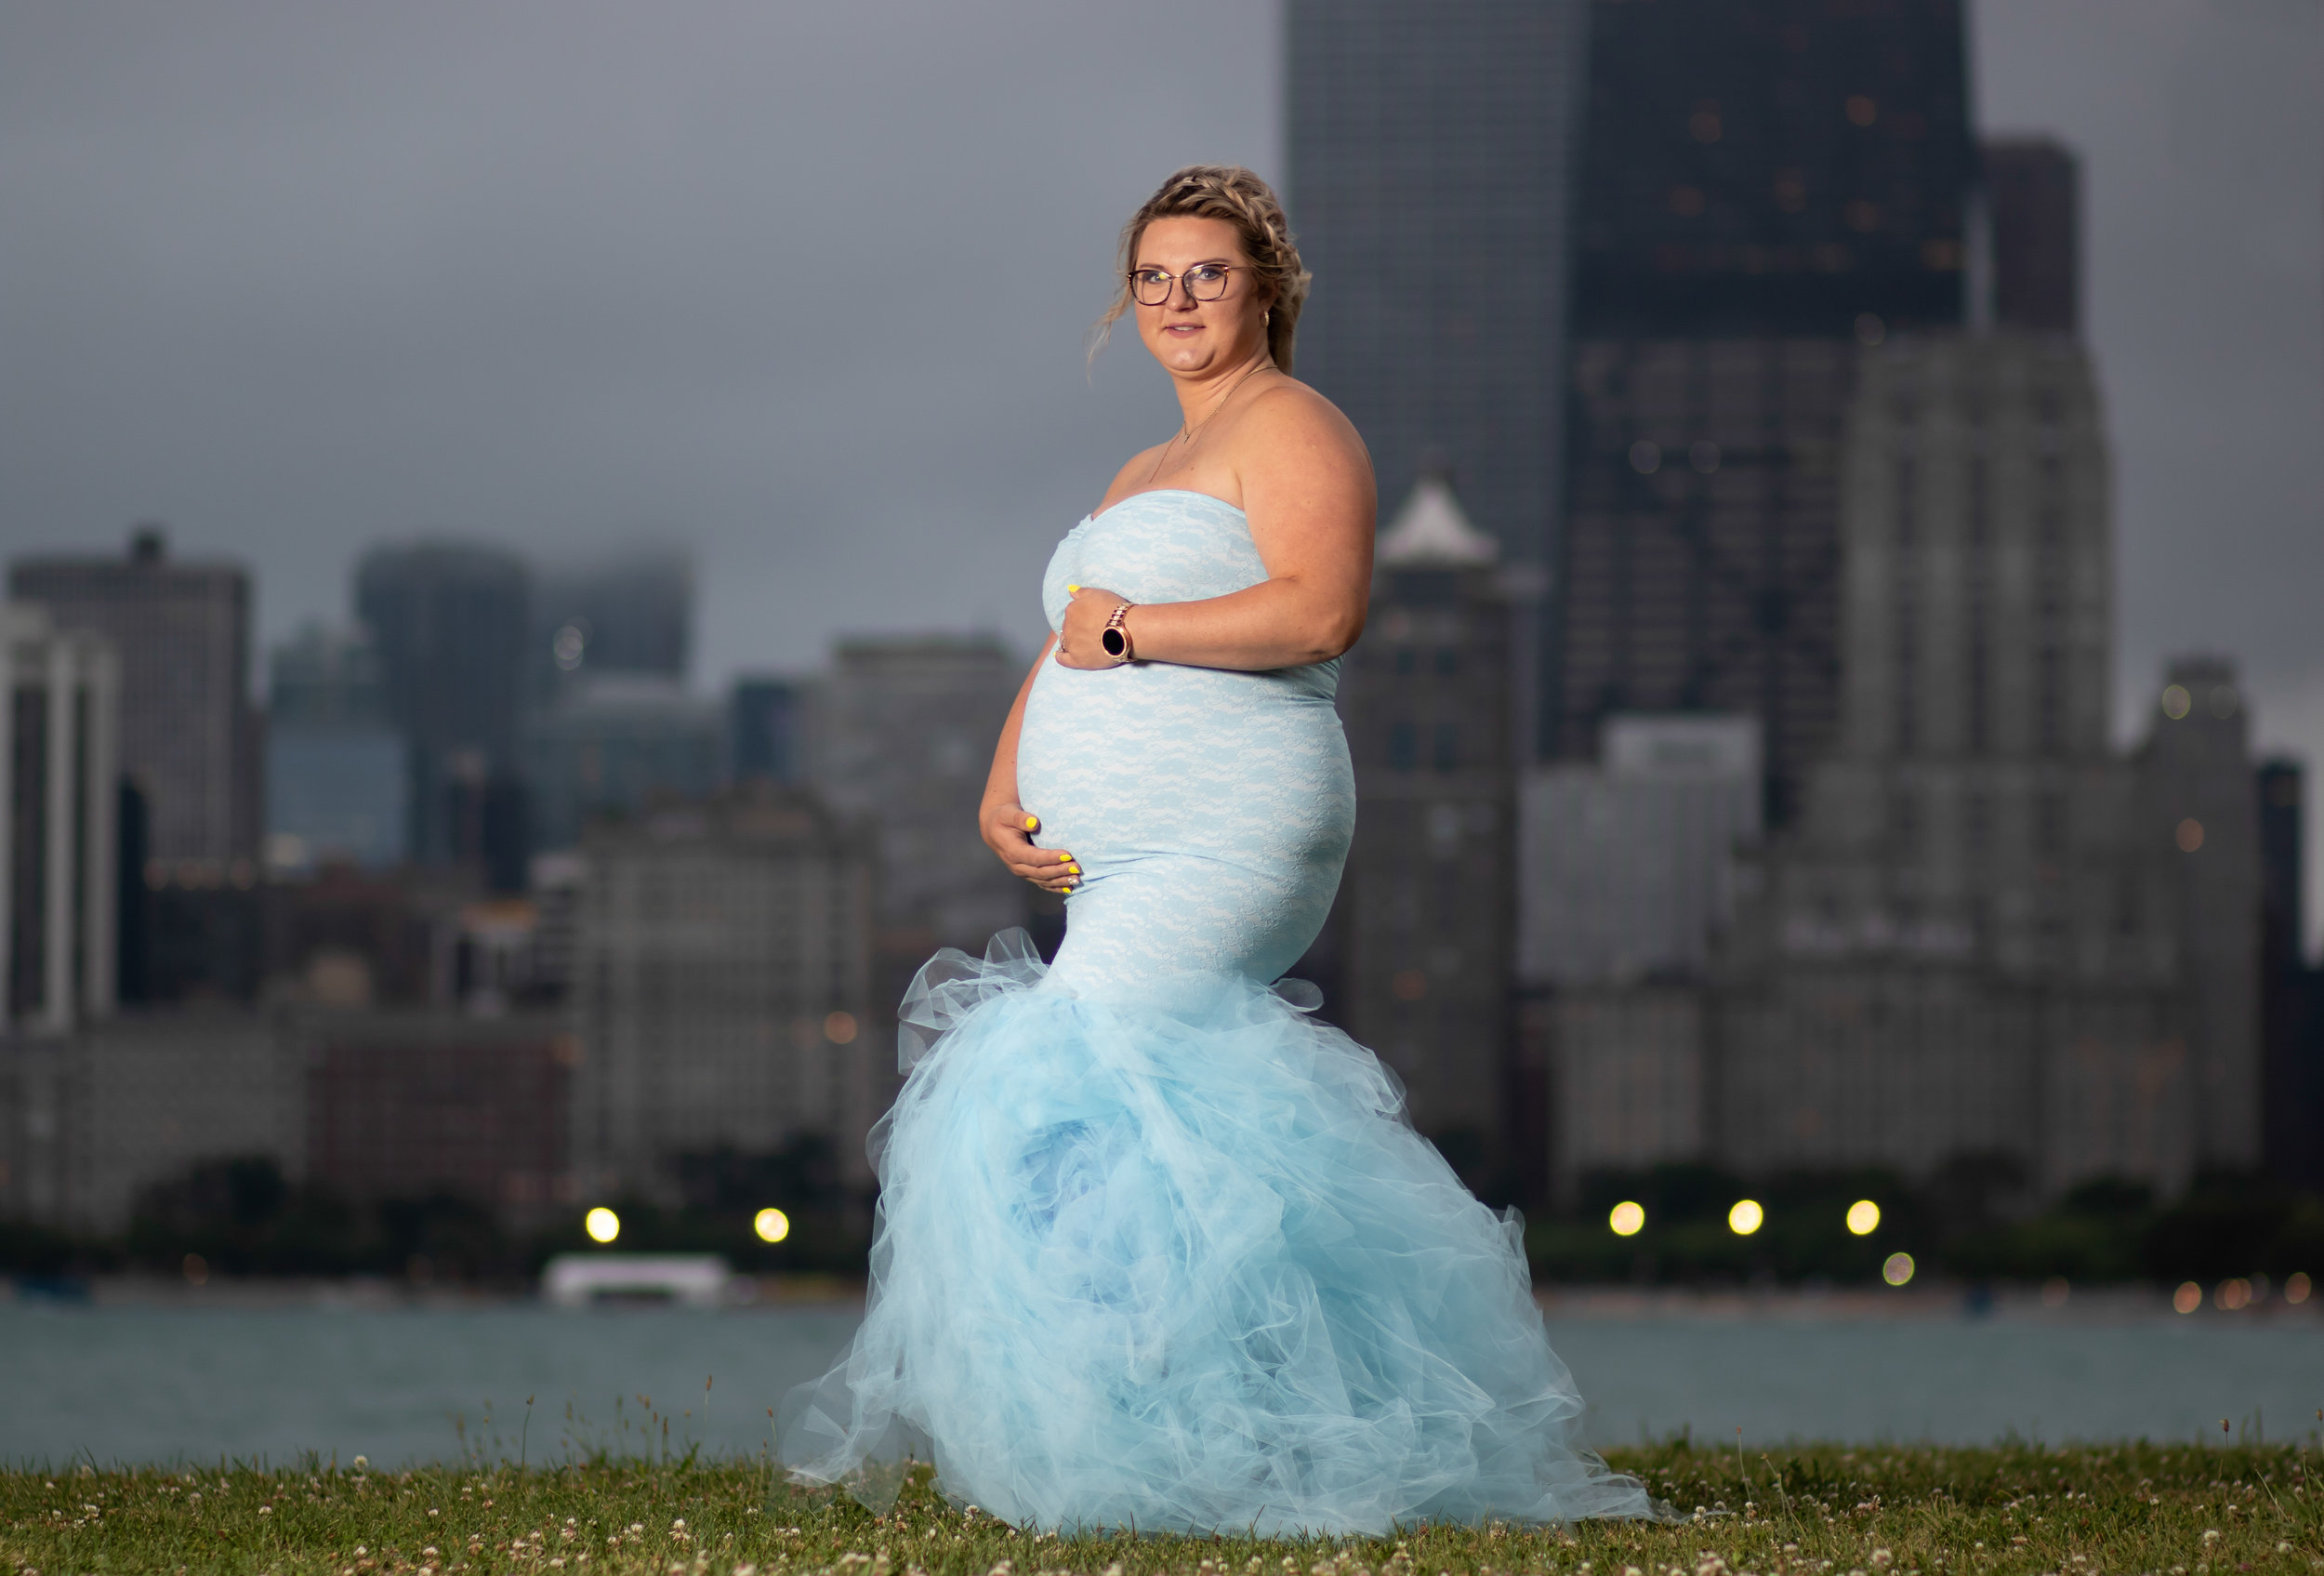 Chicago Pregnancy Photography